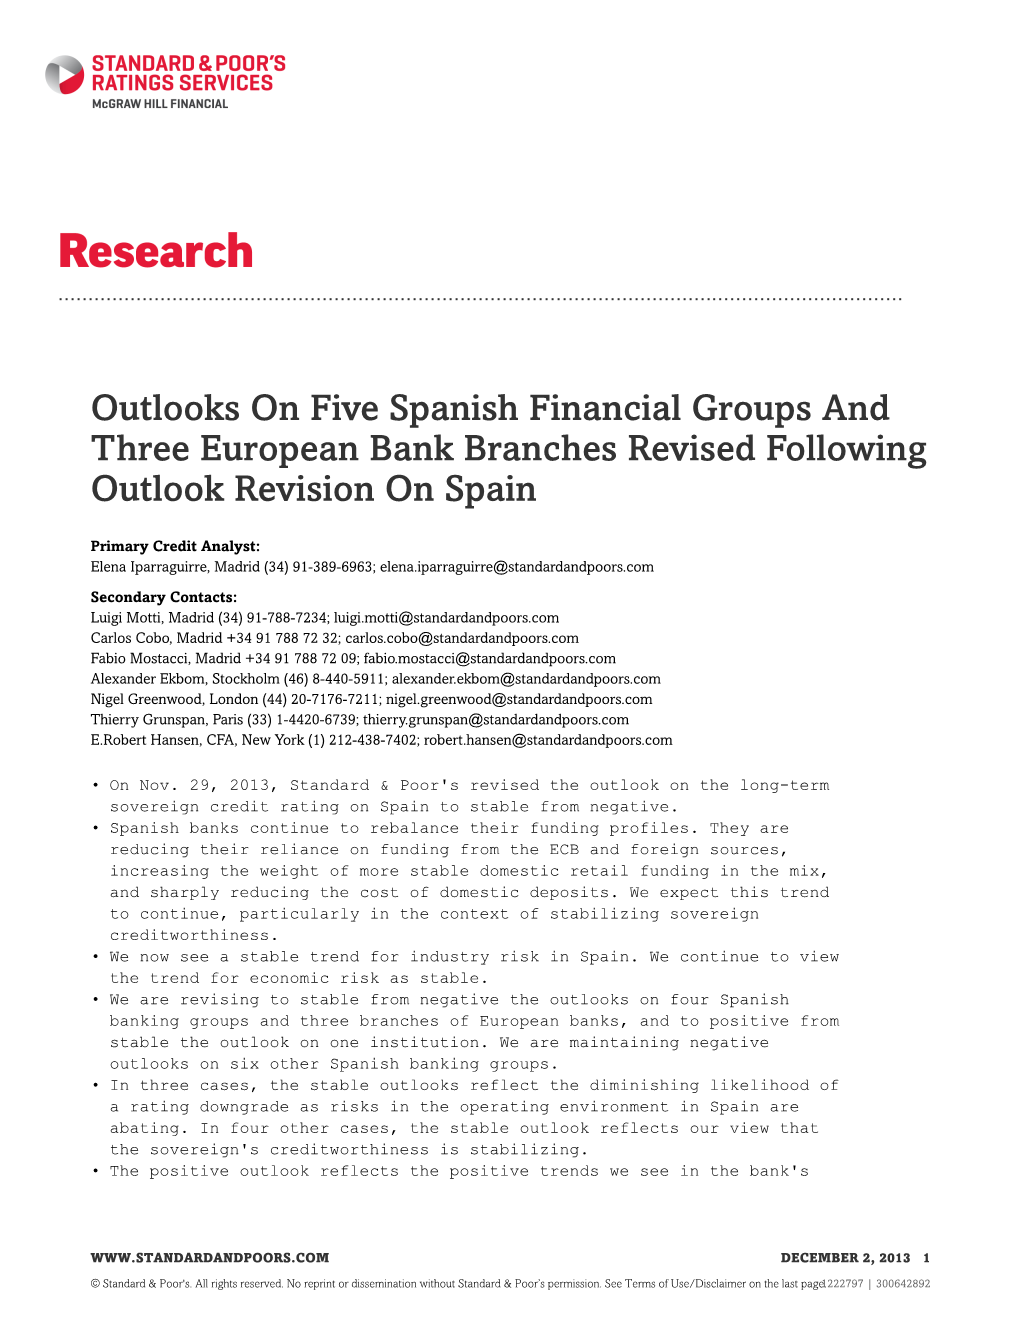 Outlooks on Five Spanish Financial Groups and Three European Bank Branches Revised Following Outlook Revision on Spain